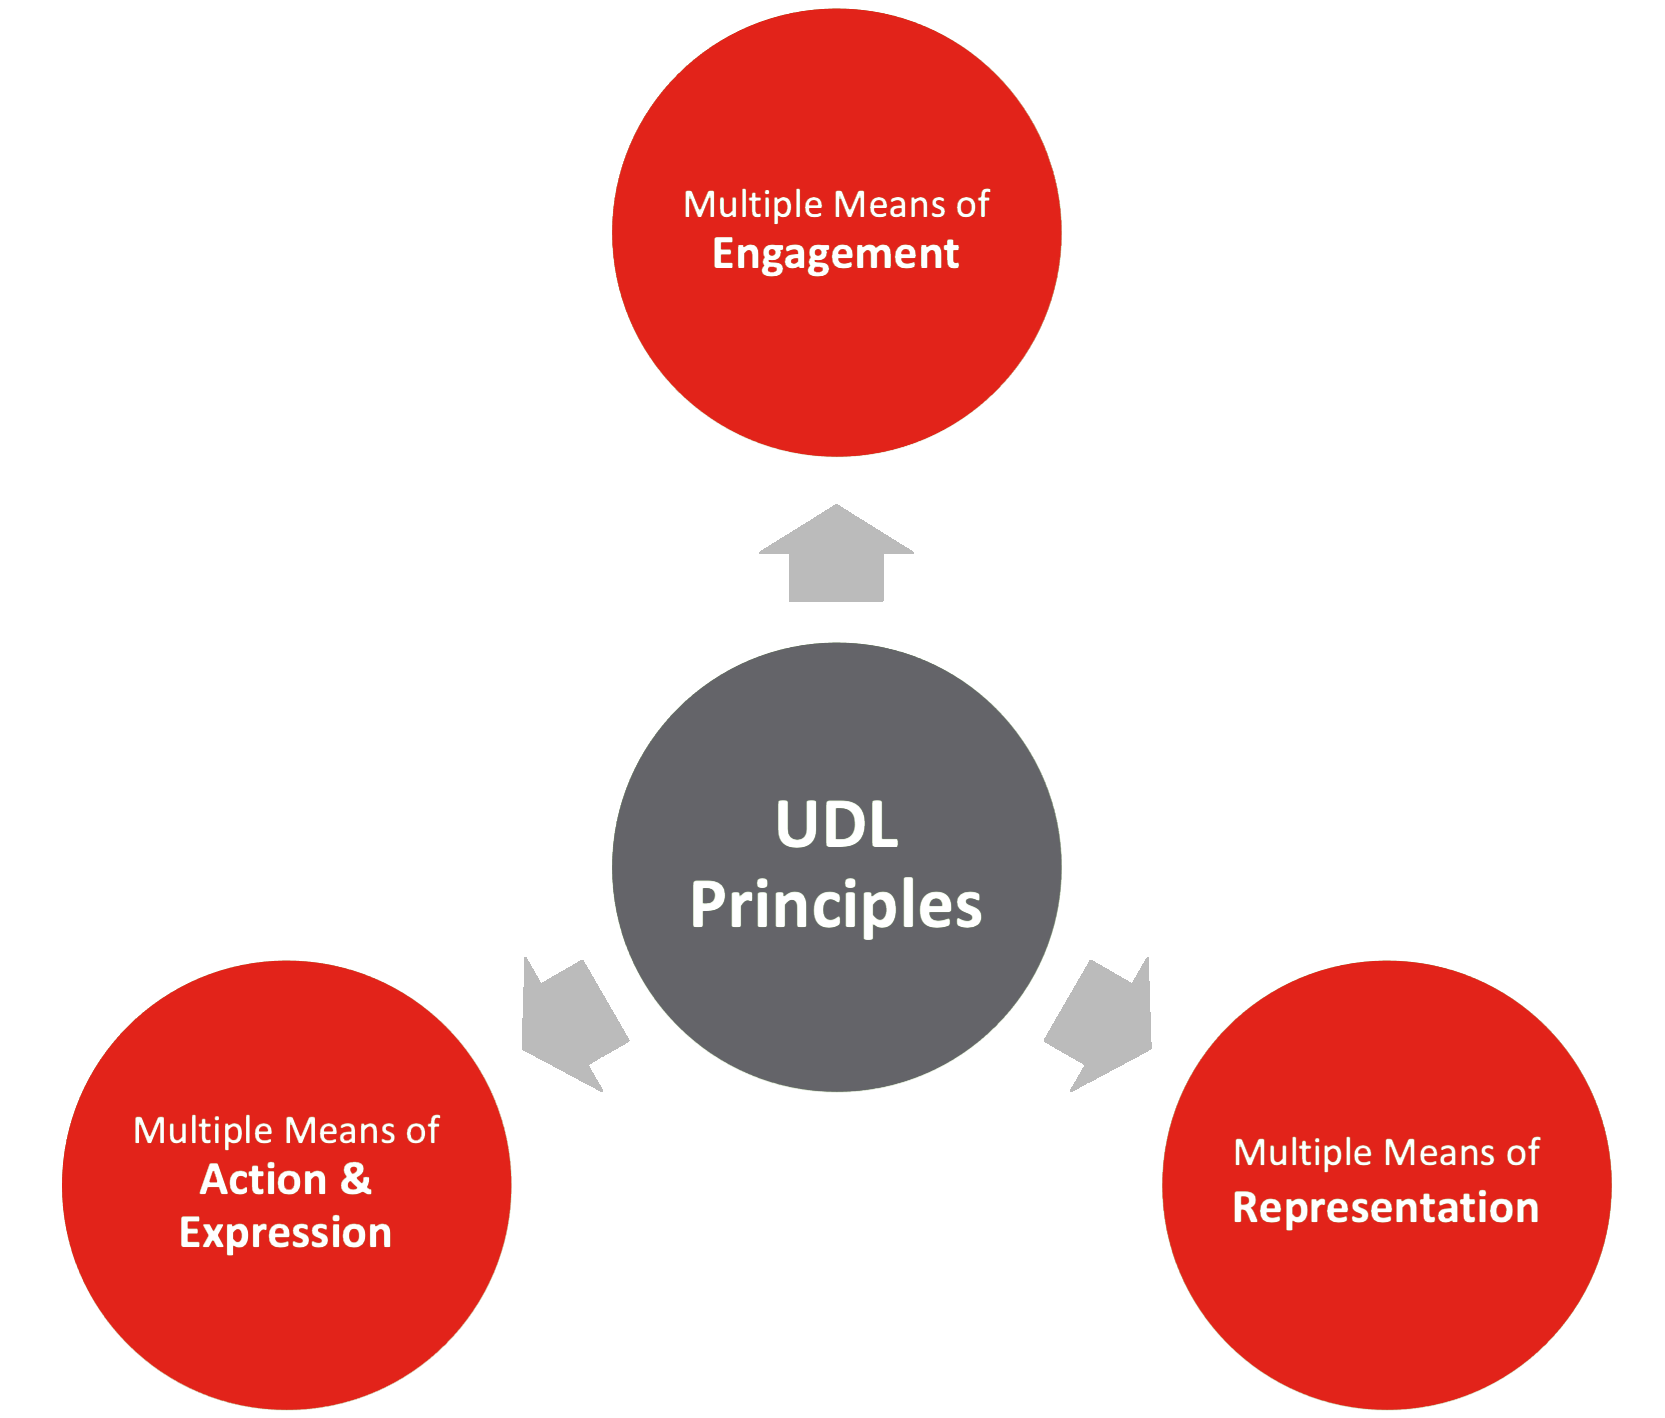 UDL Principles: Multiple means of Engagement, Action & Expressions, and Representation